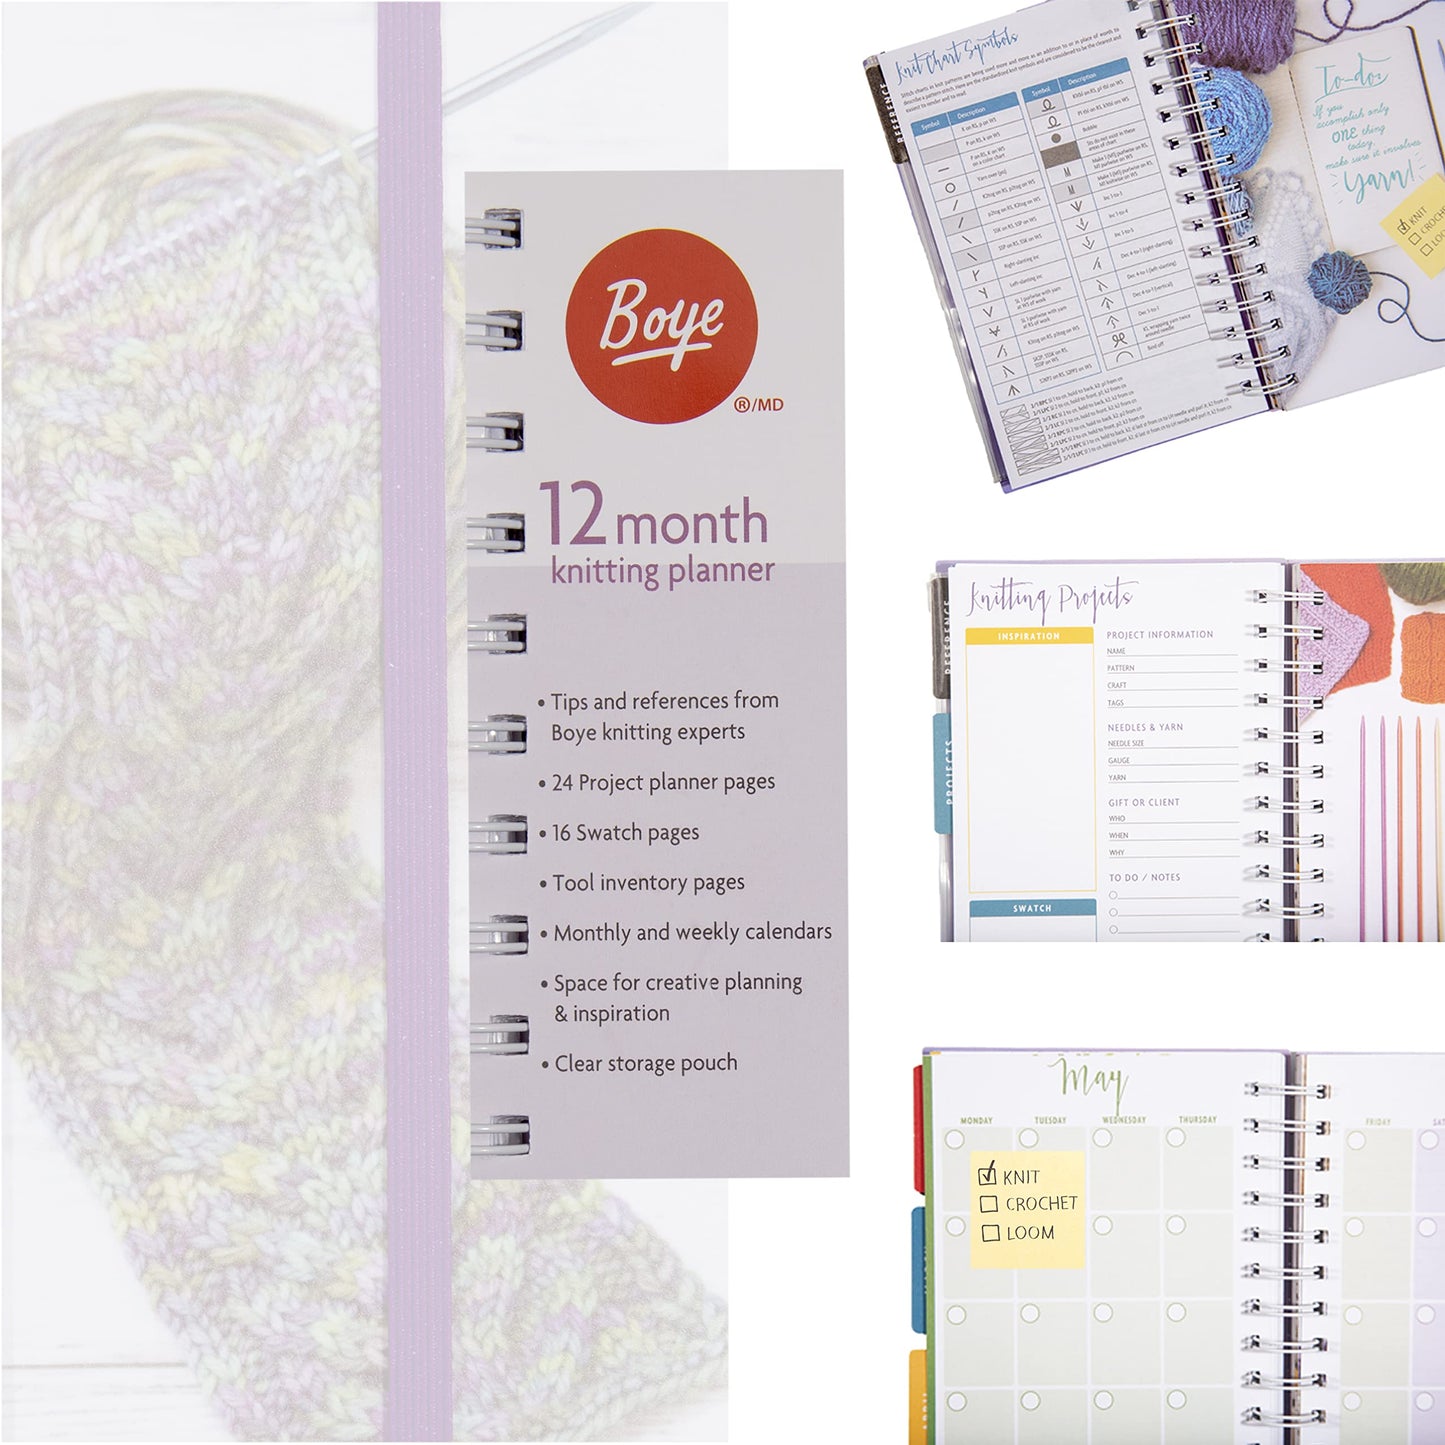 Eselect Boye I Taught Myself to Knit Tutorial Kit, Bundle Includes Bernat Softee Chunky Deep Waters Yarn, 12-Month Planner, Multiple Knitting Needle